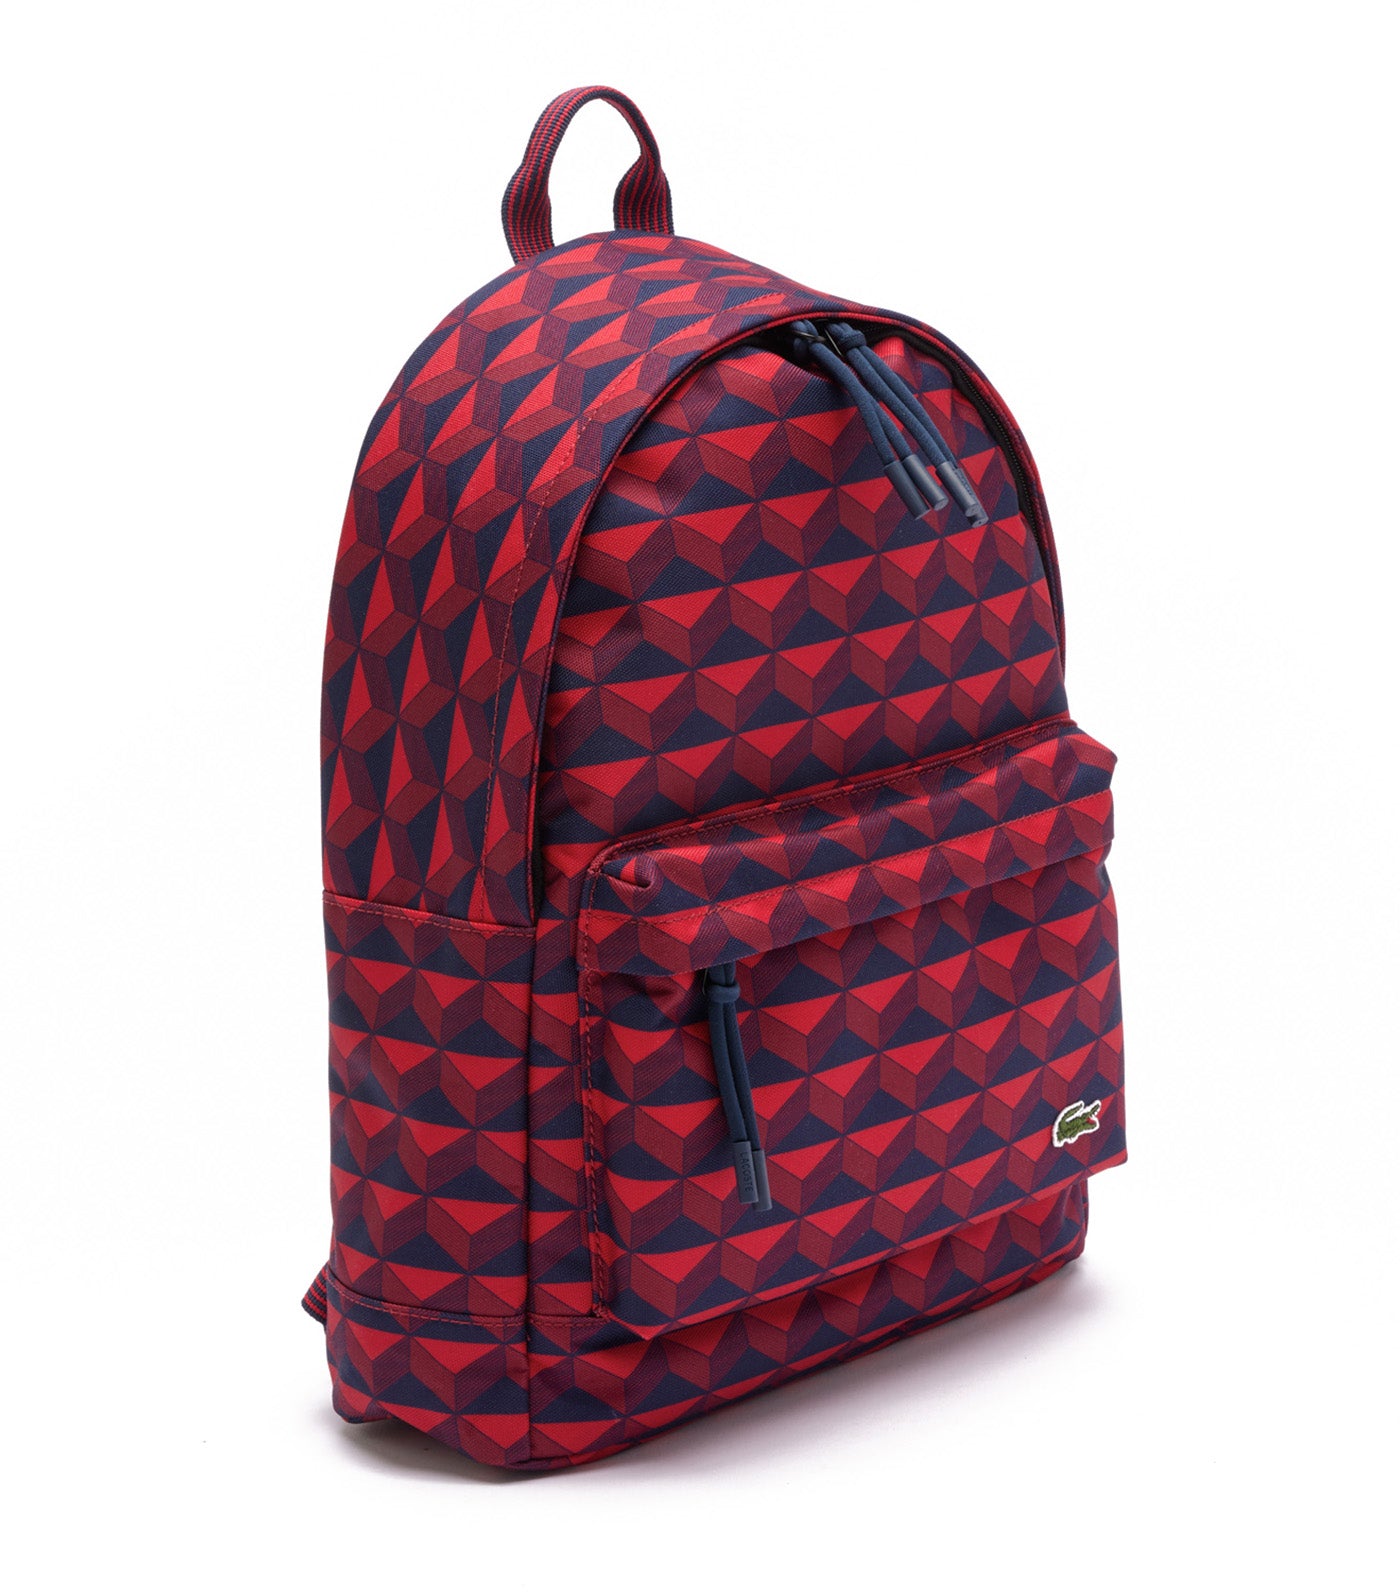 Neocroc Backpack with Laptop Pocket Robert Georges Marine